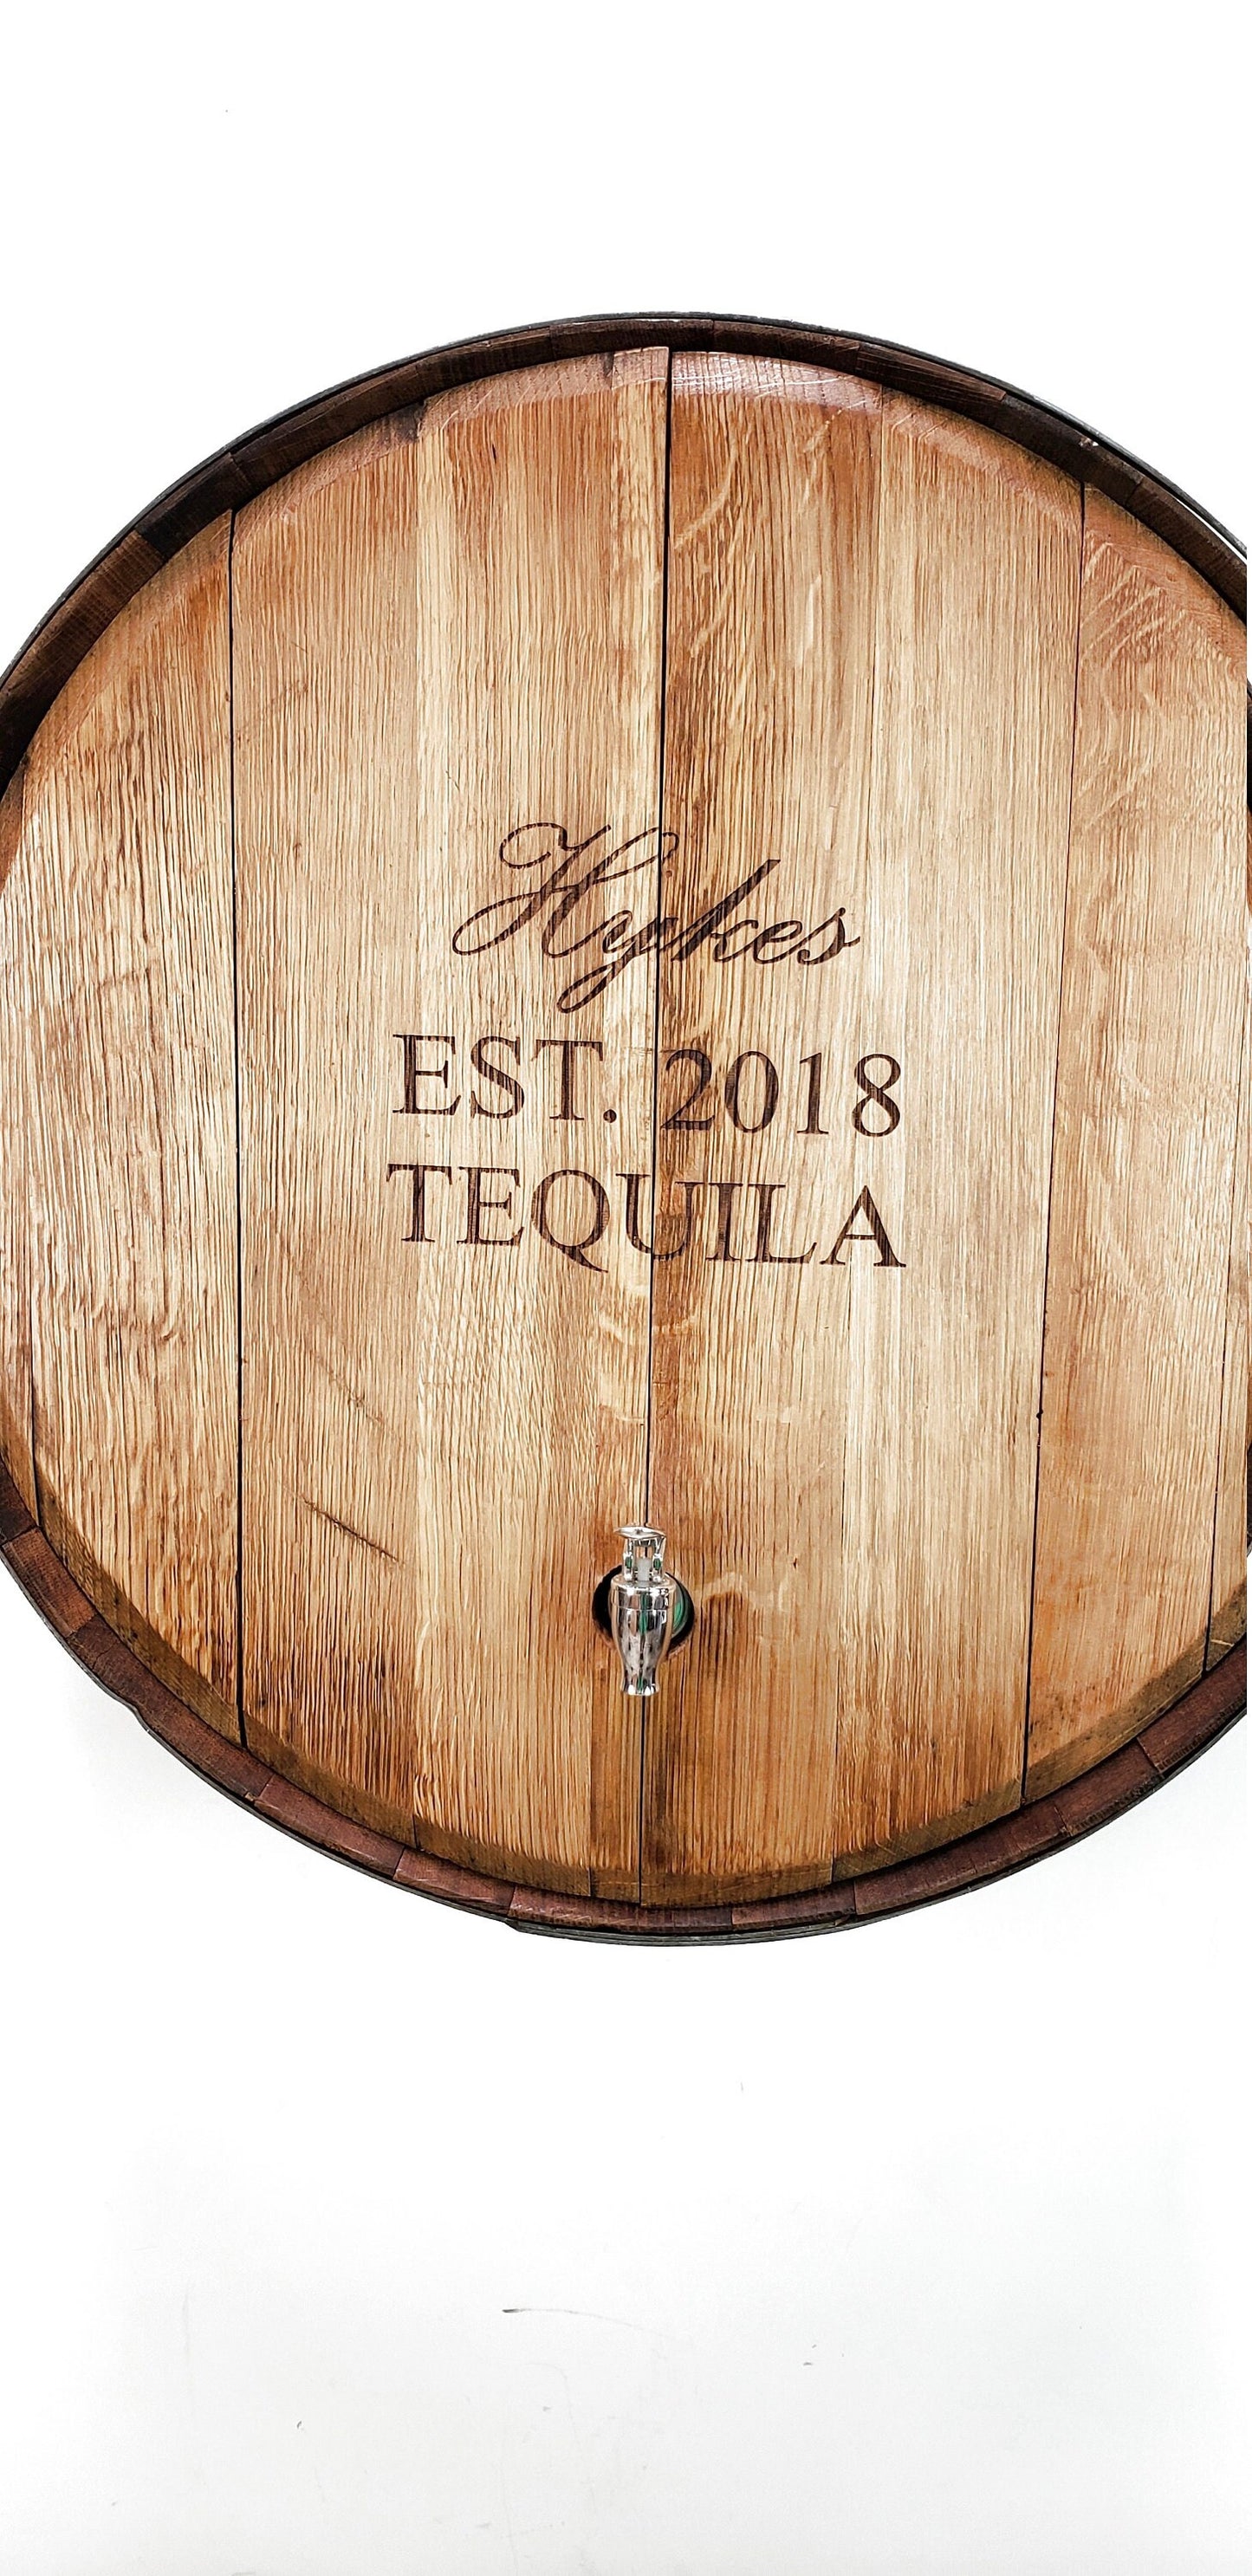 Wall Mounted Drink Dispensary - Runda - Retired Napa Wine Barrel With Custom Personalized Engraving